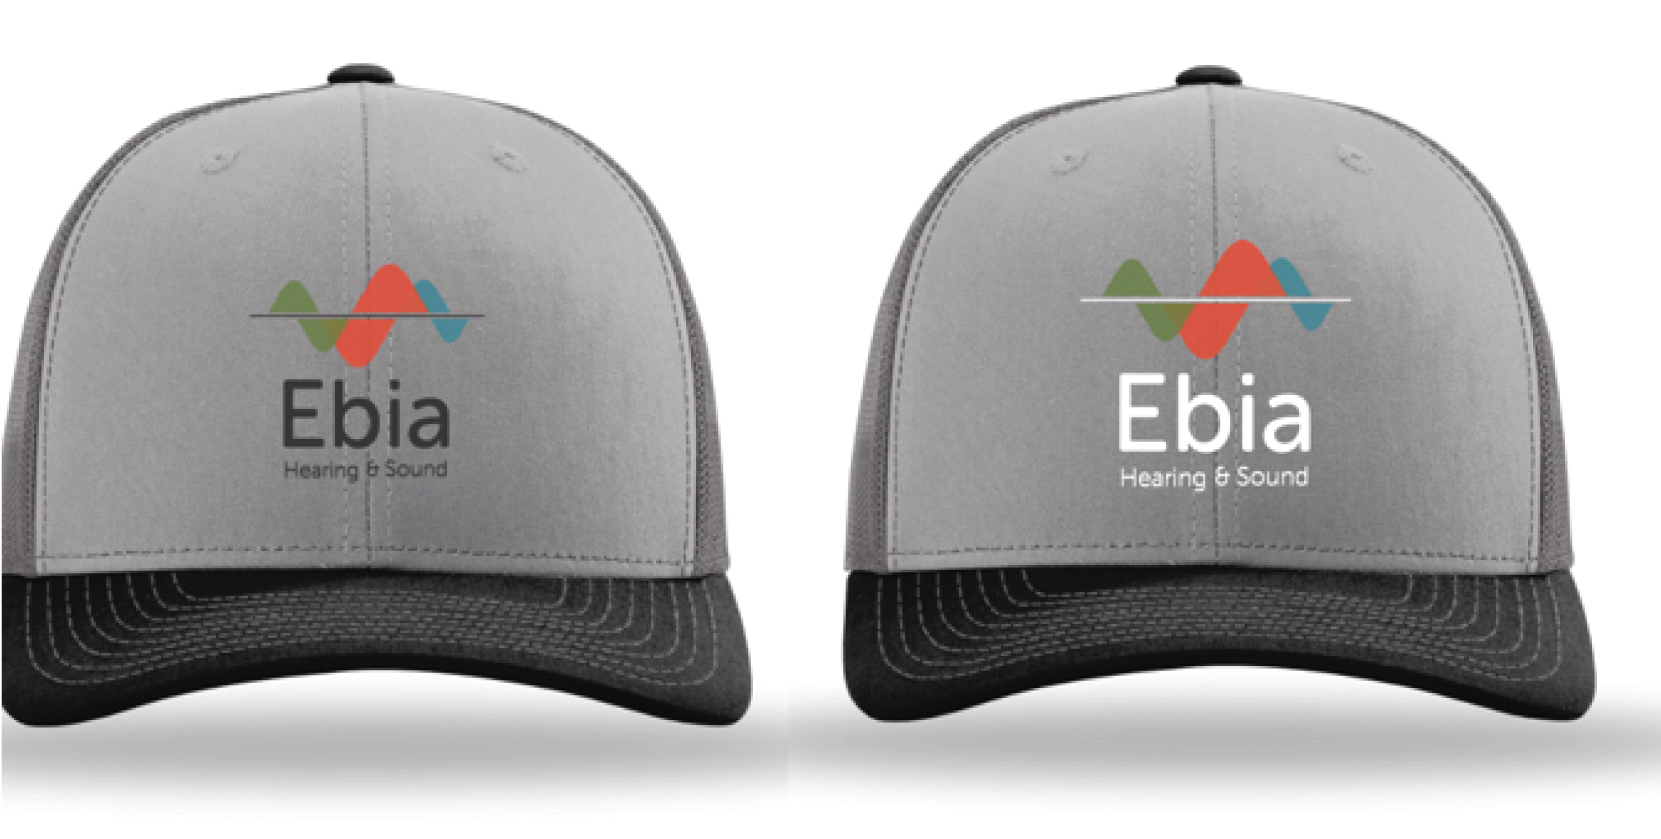 Ebia Hearing and Sound - branding and logo design